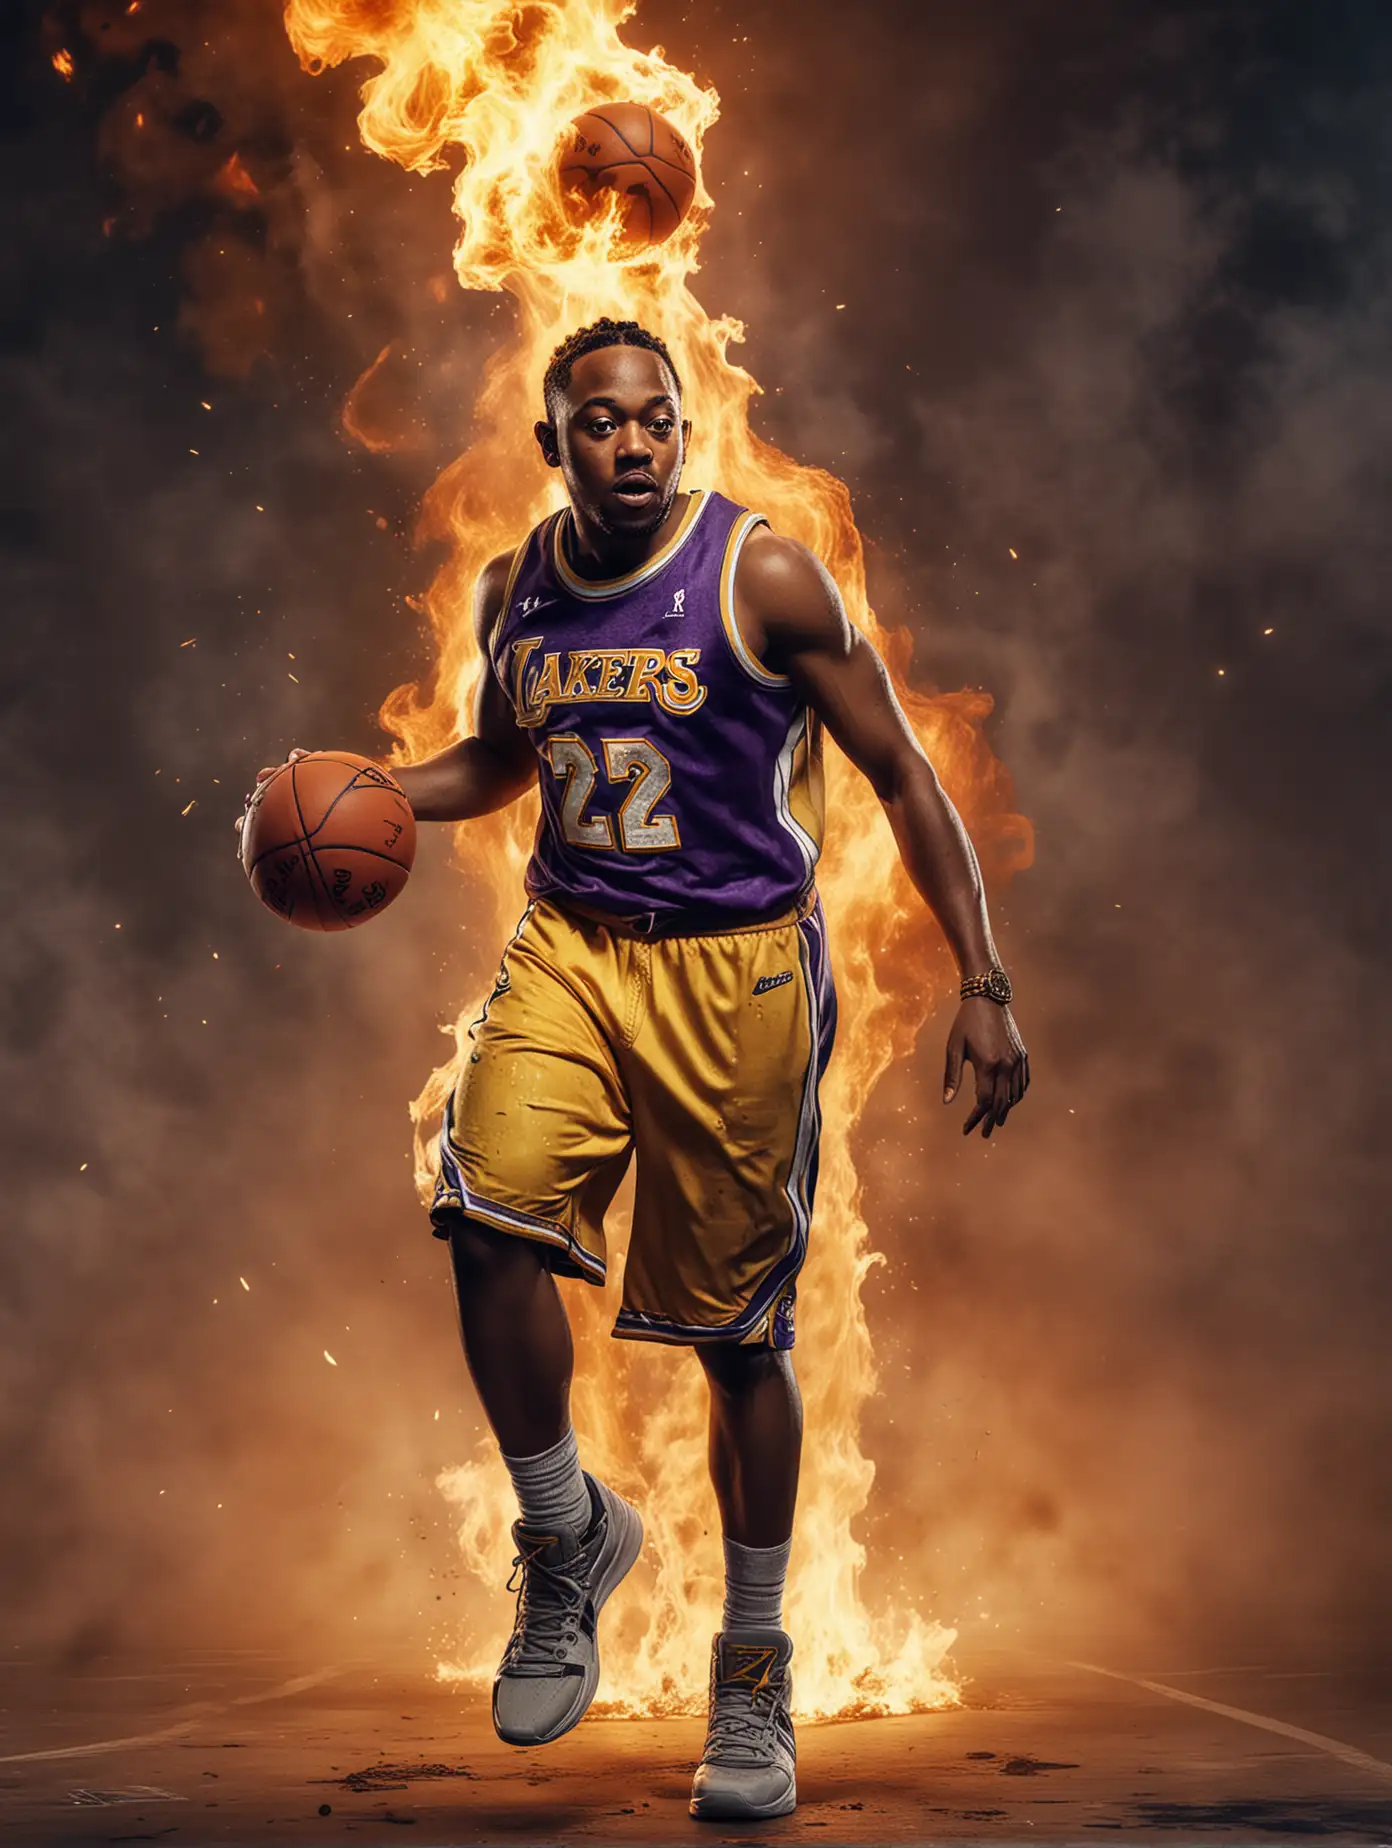 ULTRA REALISTIC high definition, picture of kendrick lamar, wearing a lakers uniform, slam dunking a basketball on fire